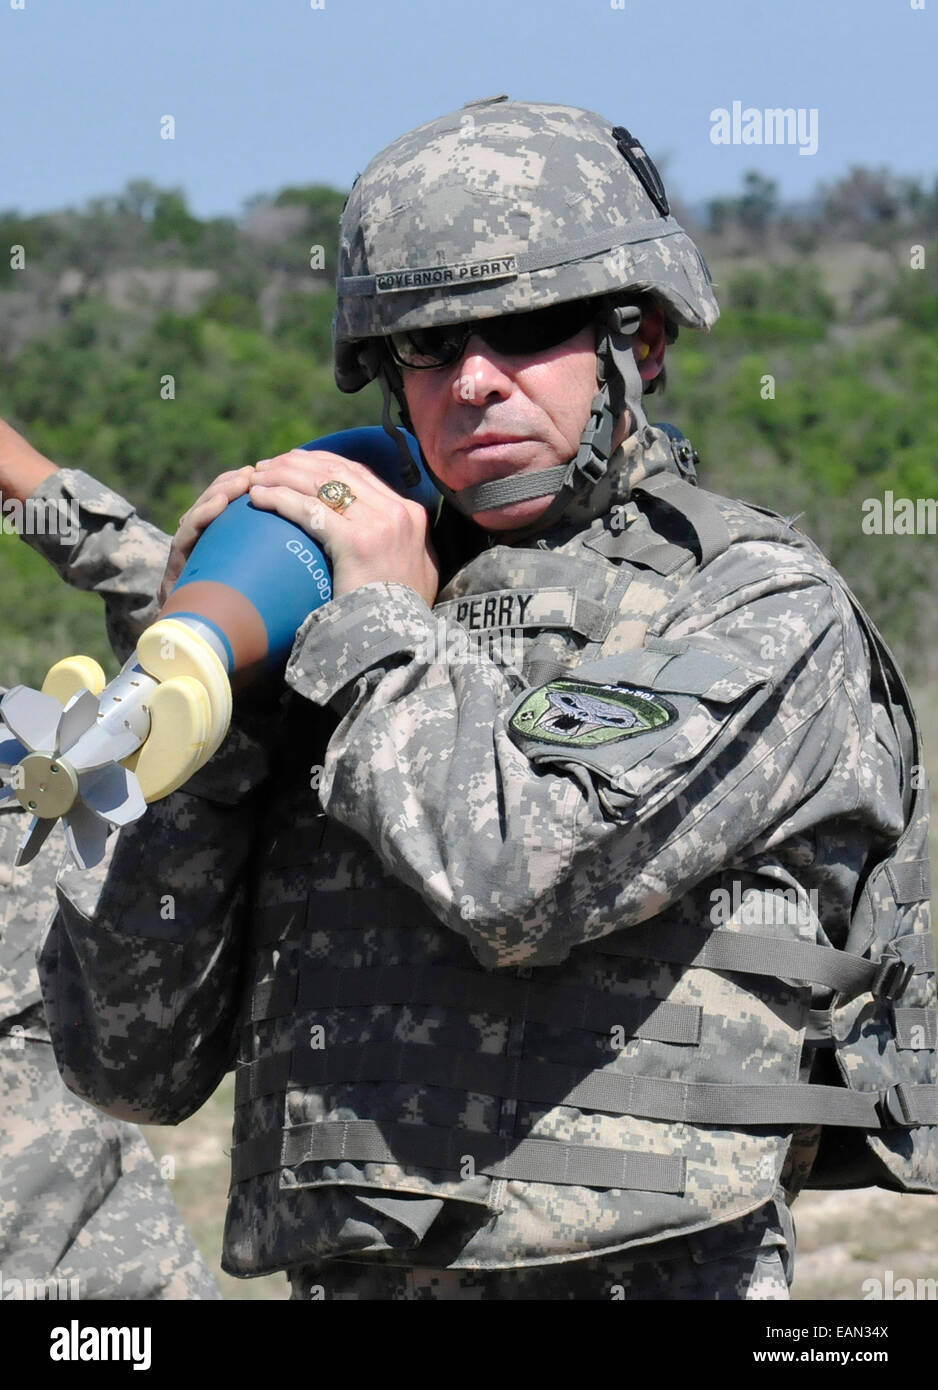 Texas Governor Rick Perry holds a mortar rocket during a visit to the Division Mortar School at Curry Mortar Range August 5, 2013 in Fort Hood, Texas. Stock Photo